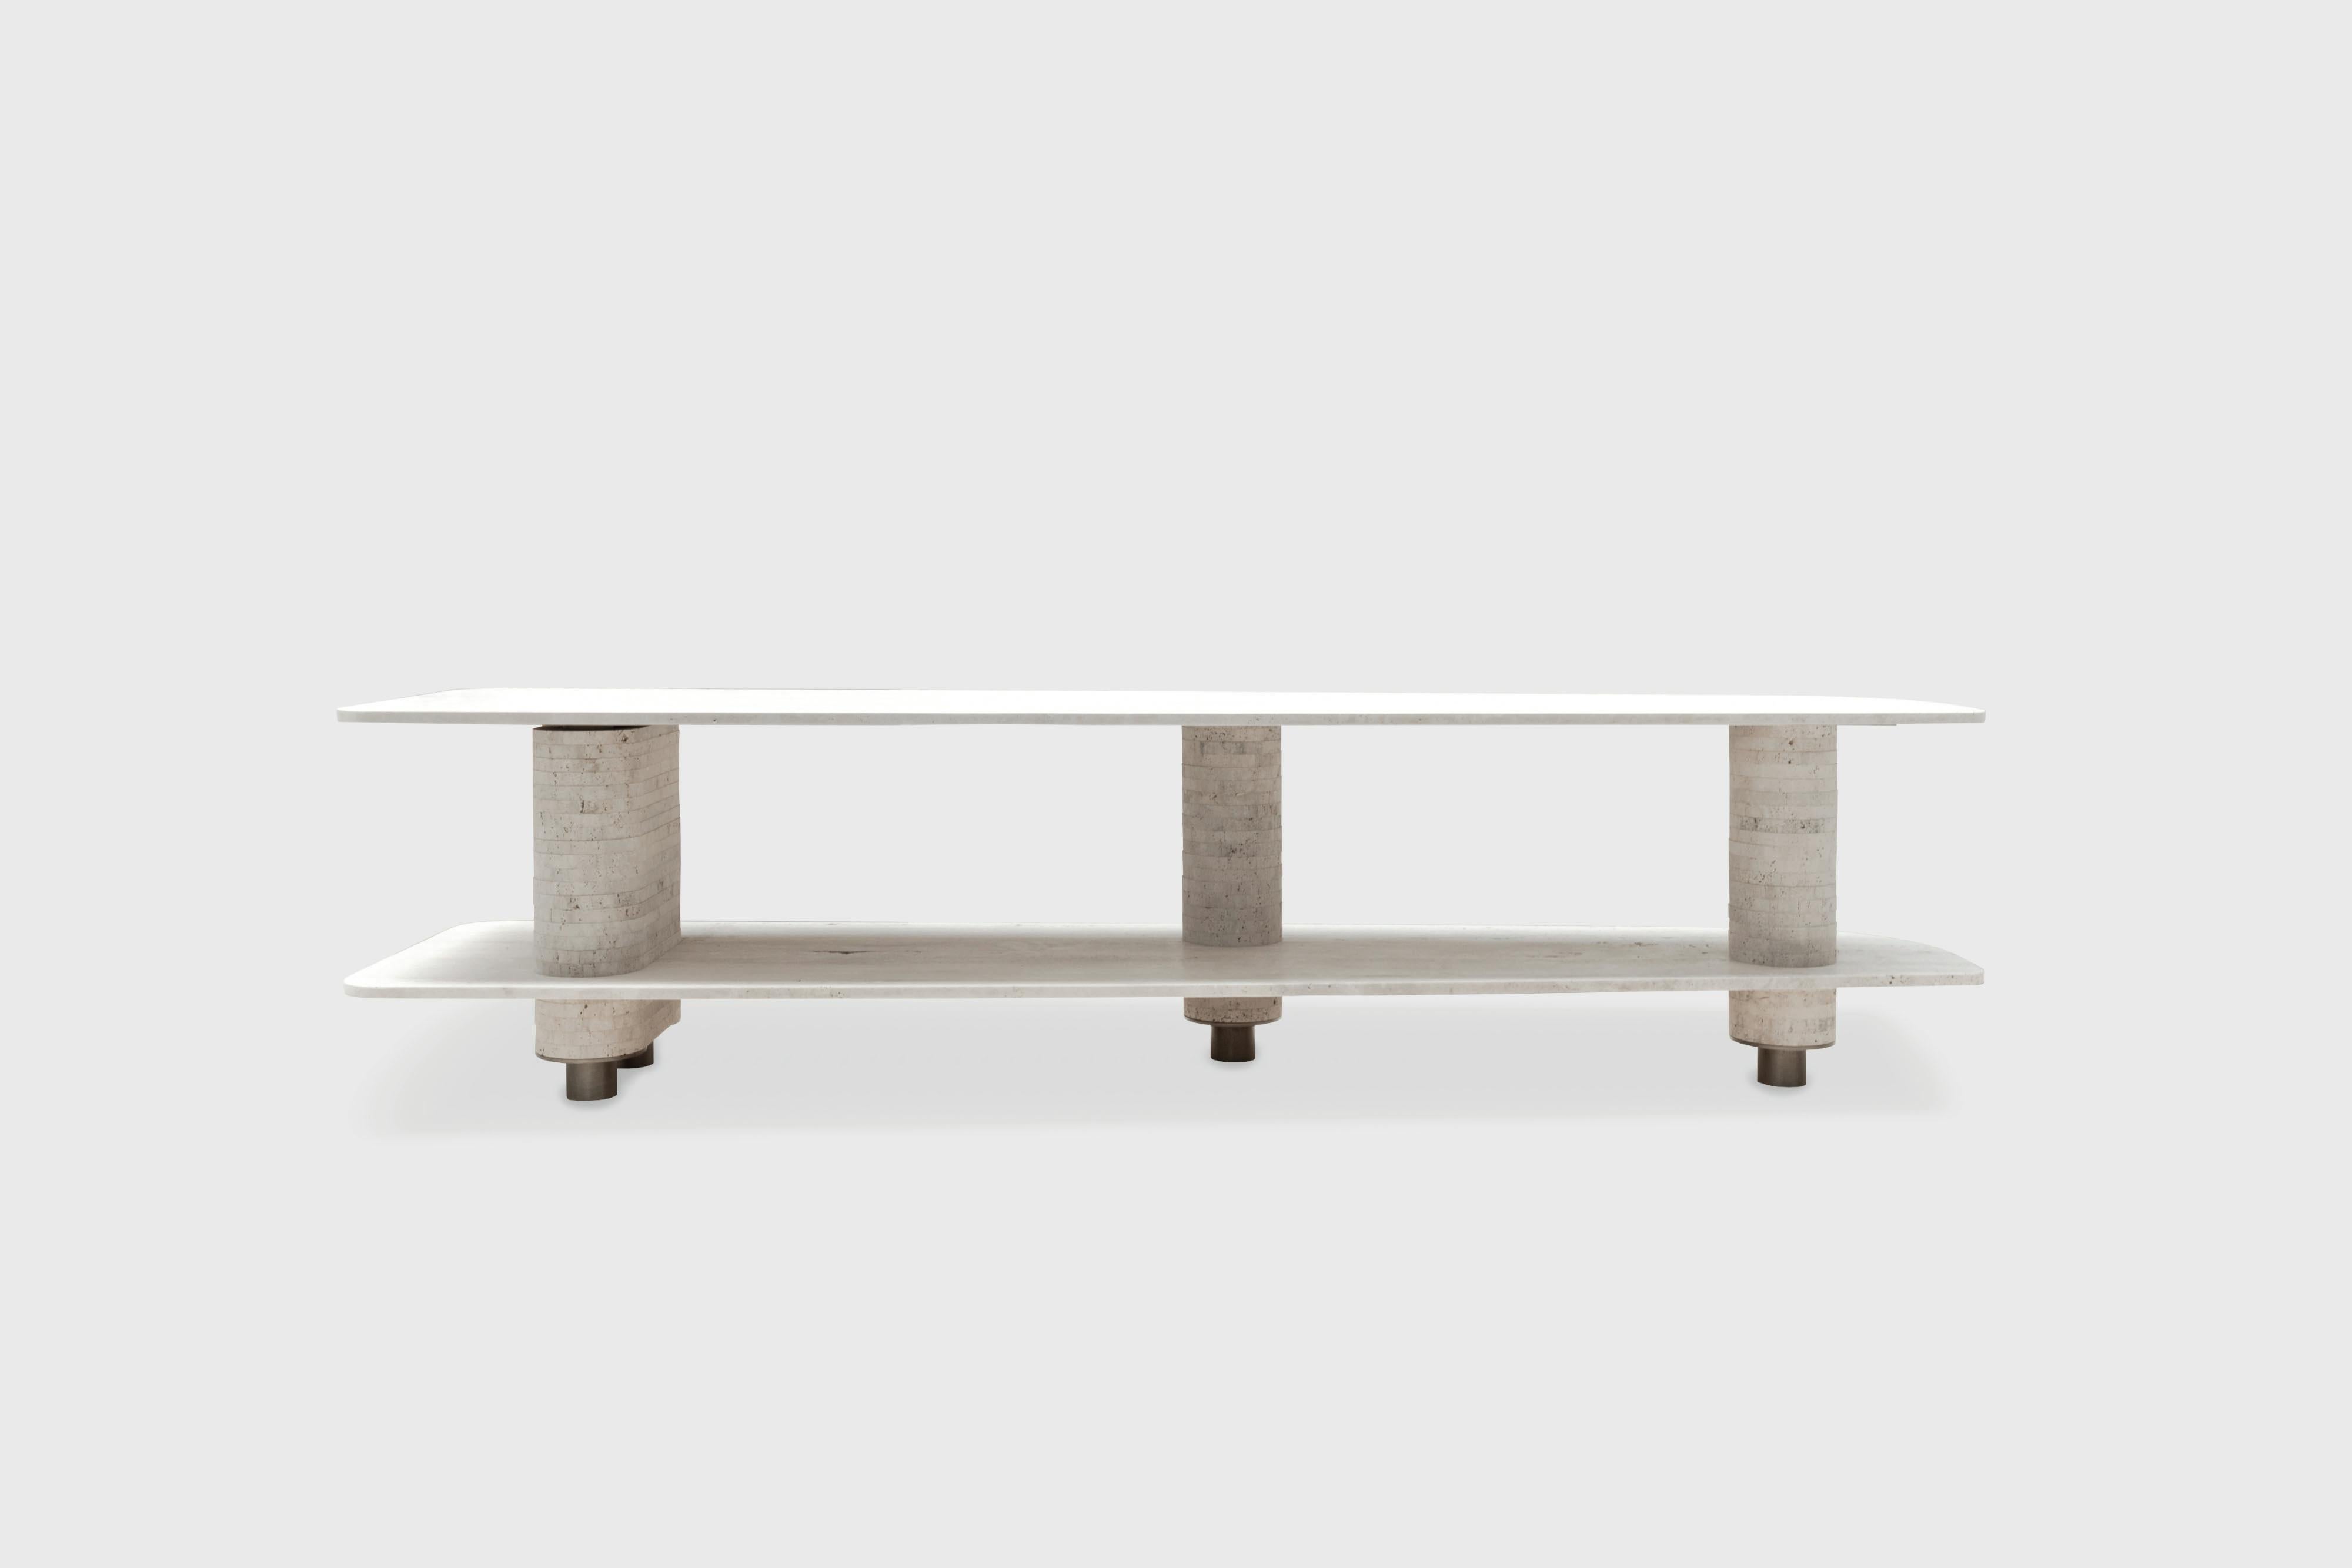 Aro console table by Atra Design
Dimensions: D 250 x W 60 x H 45 cm
Materials: Silk Georgette marble top and sculptural base of taj mahal stone rings with brass details.
Also available in different stones: Calacatta Viola, Rhino Quartz, Calacata